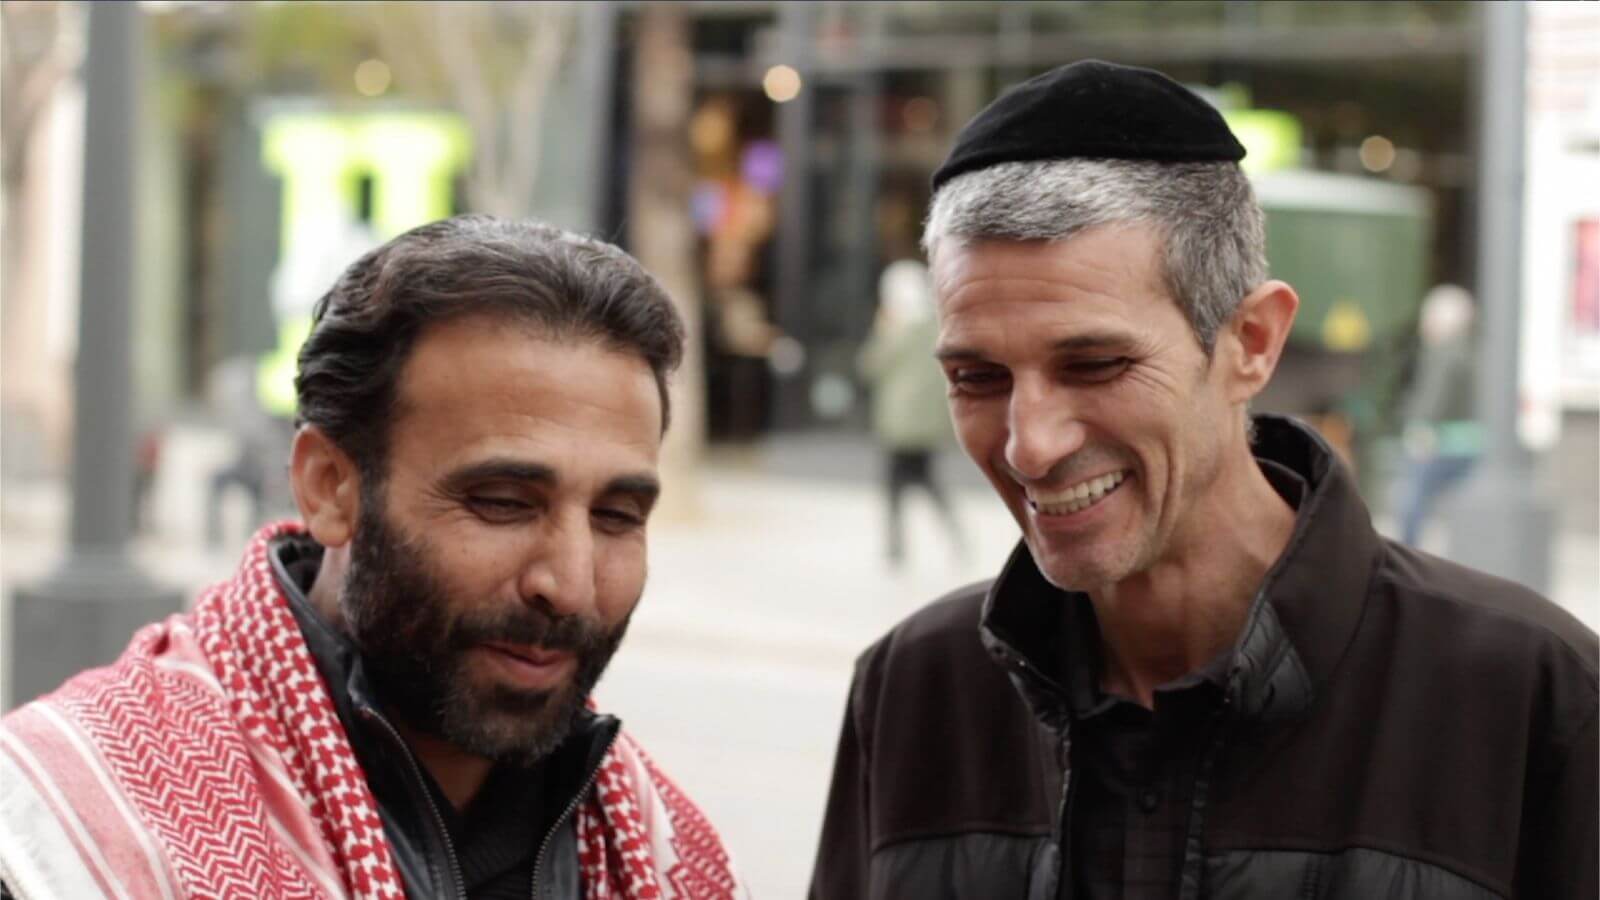 Muslim man and Jewish man standing next to each other on the street talking and smiling